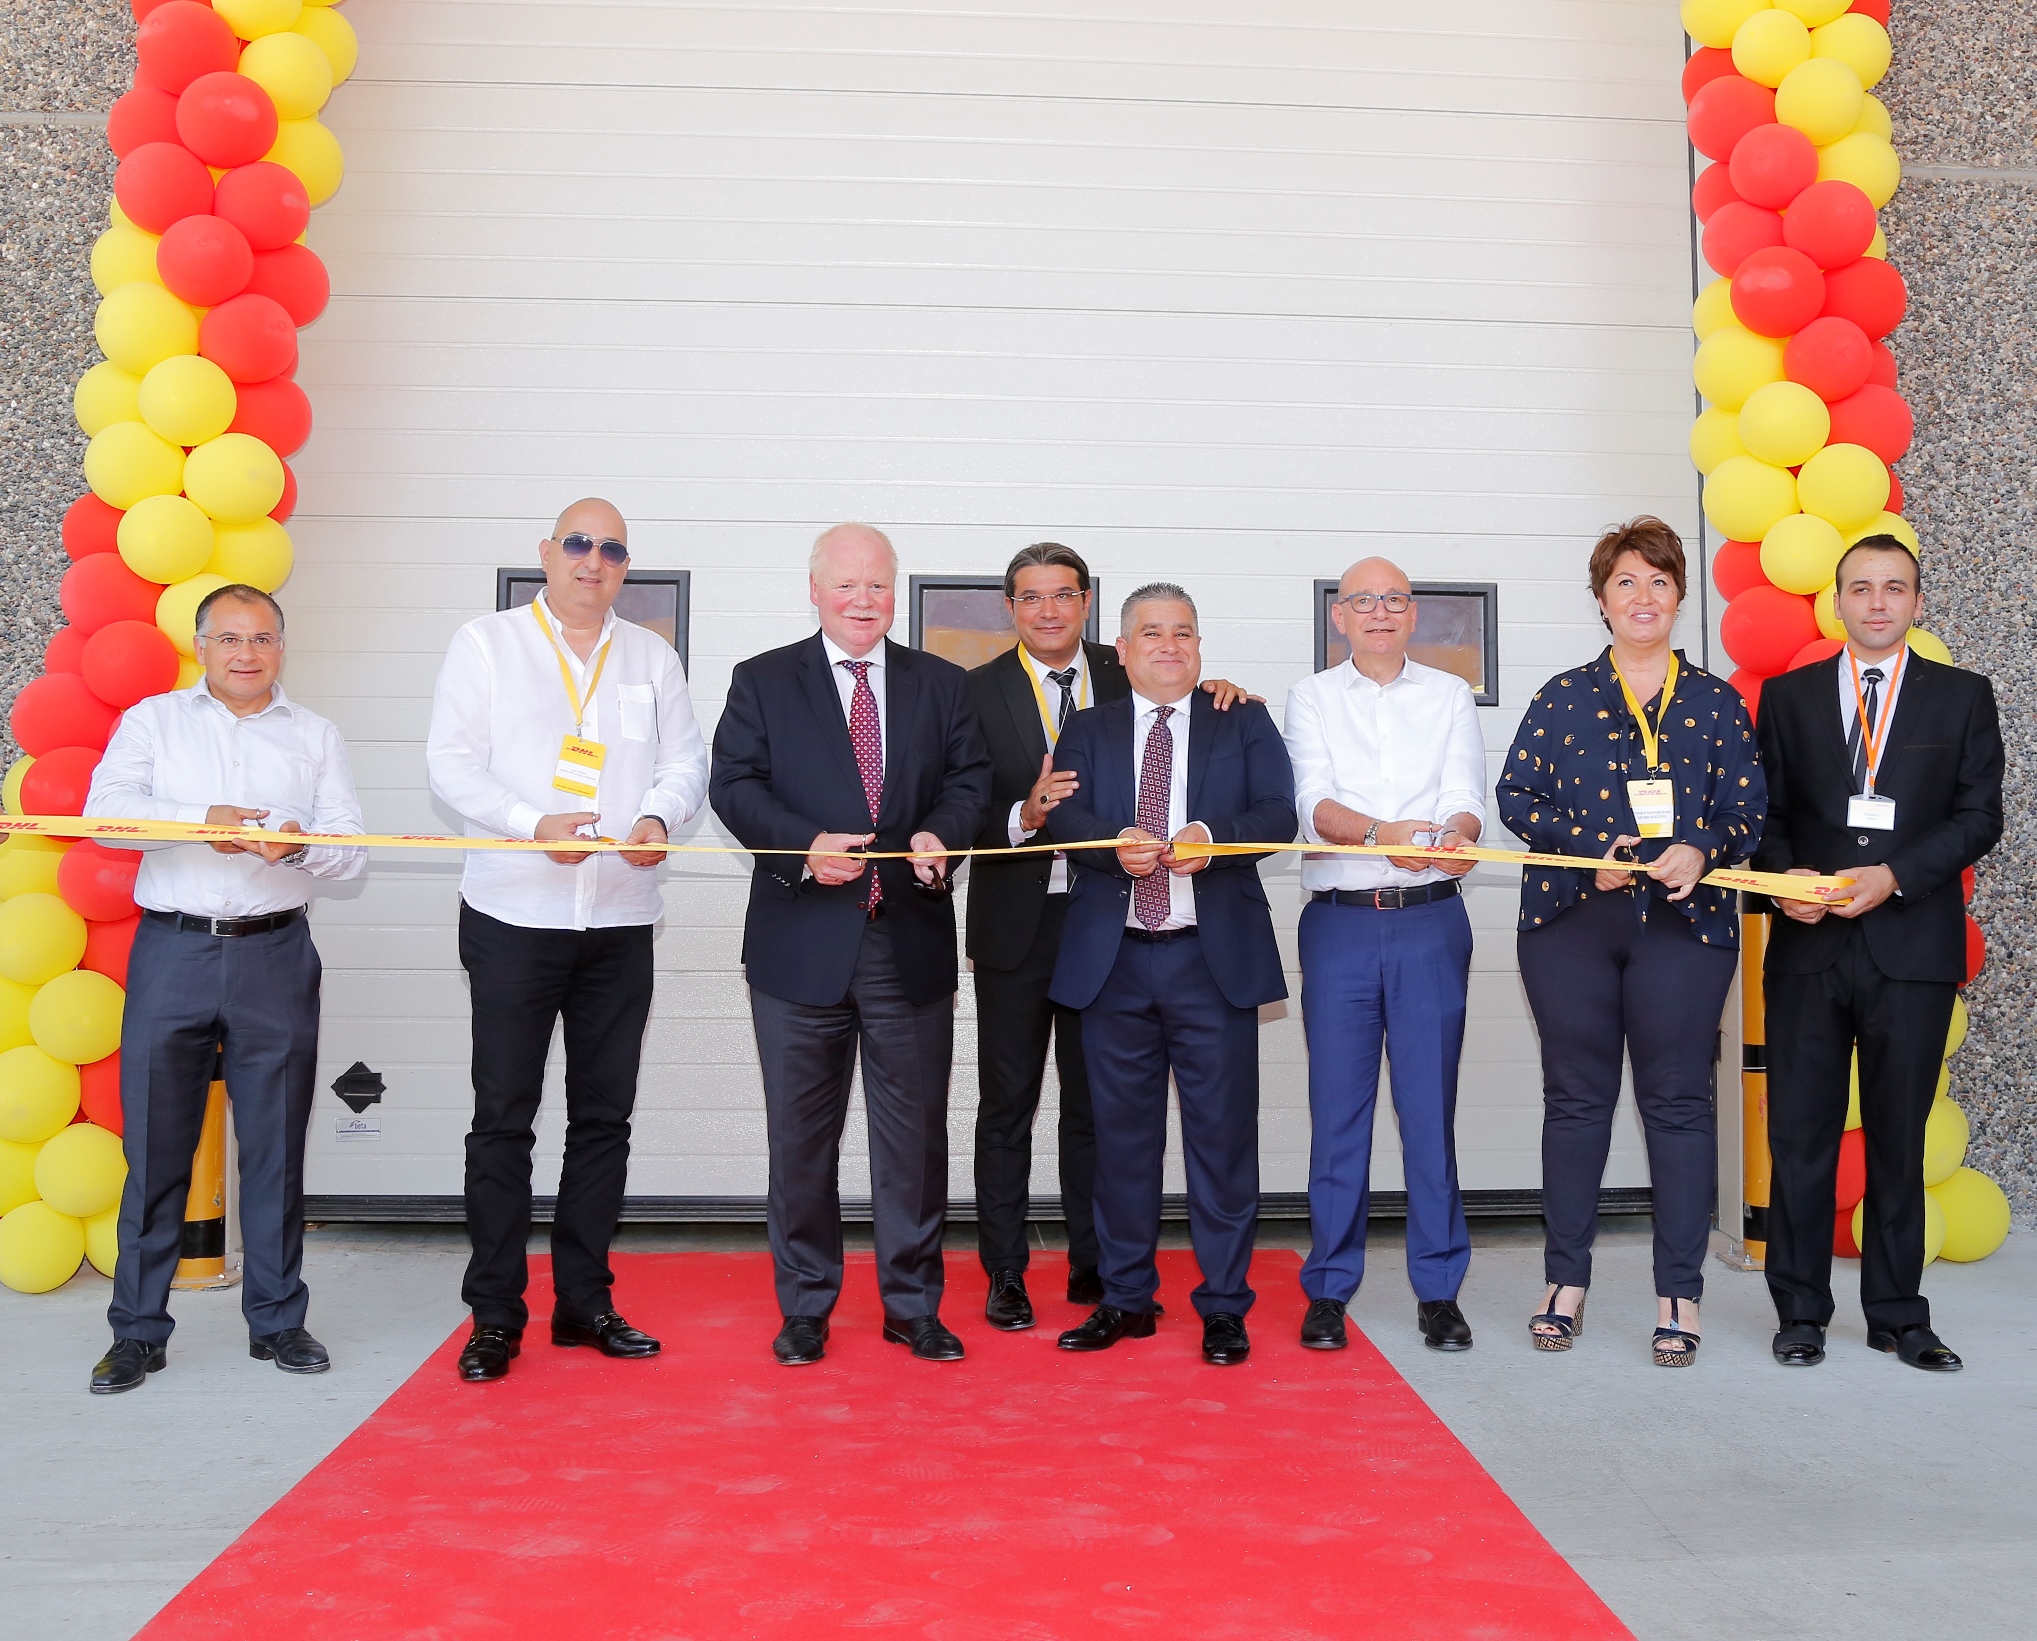 DHL will become market leader for road freight